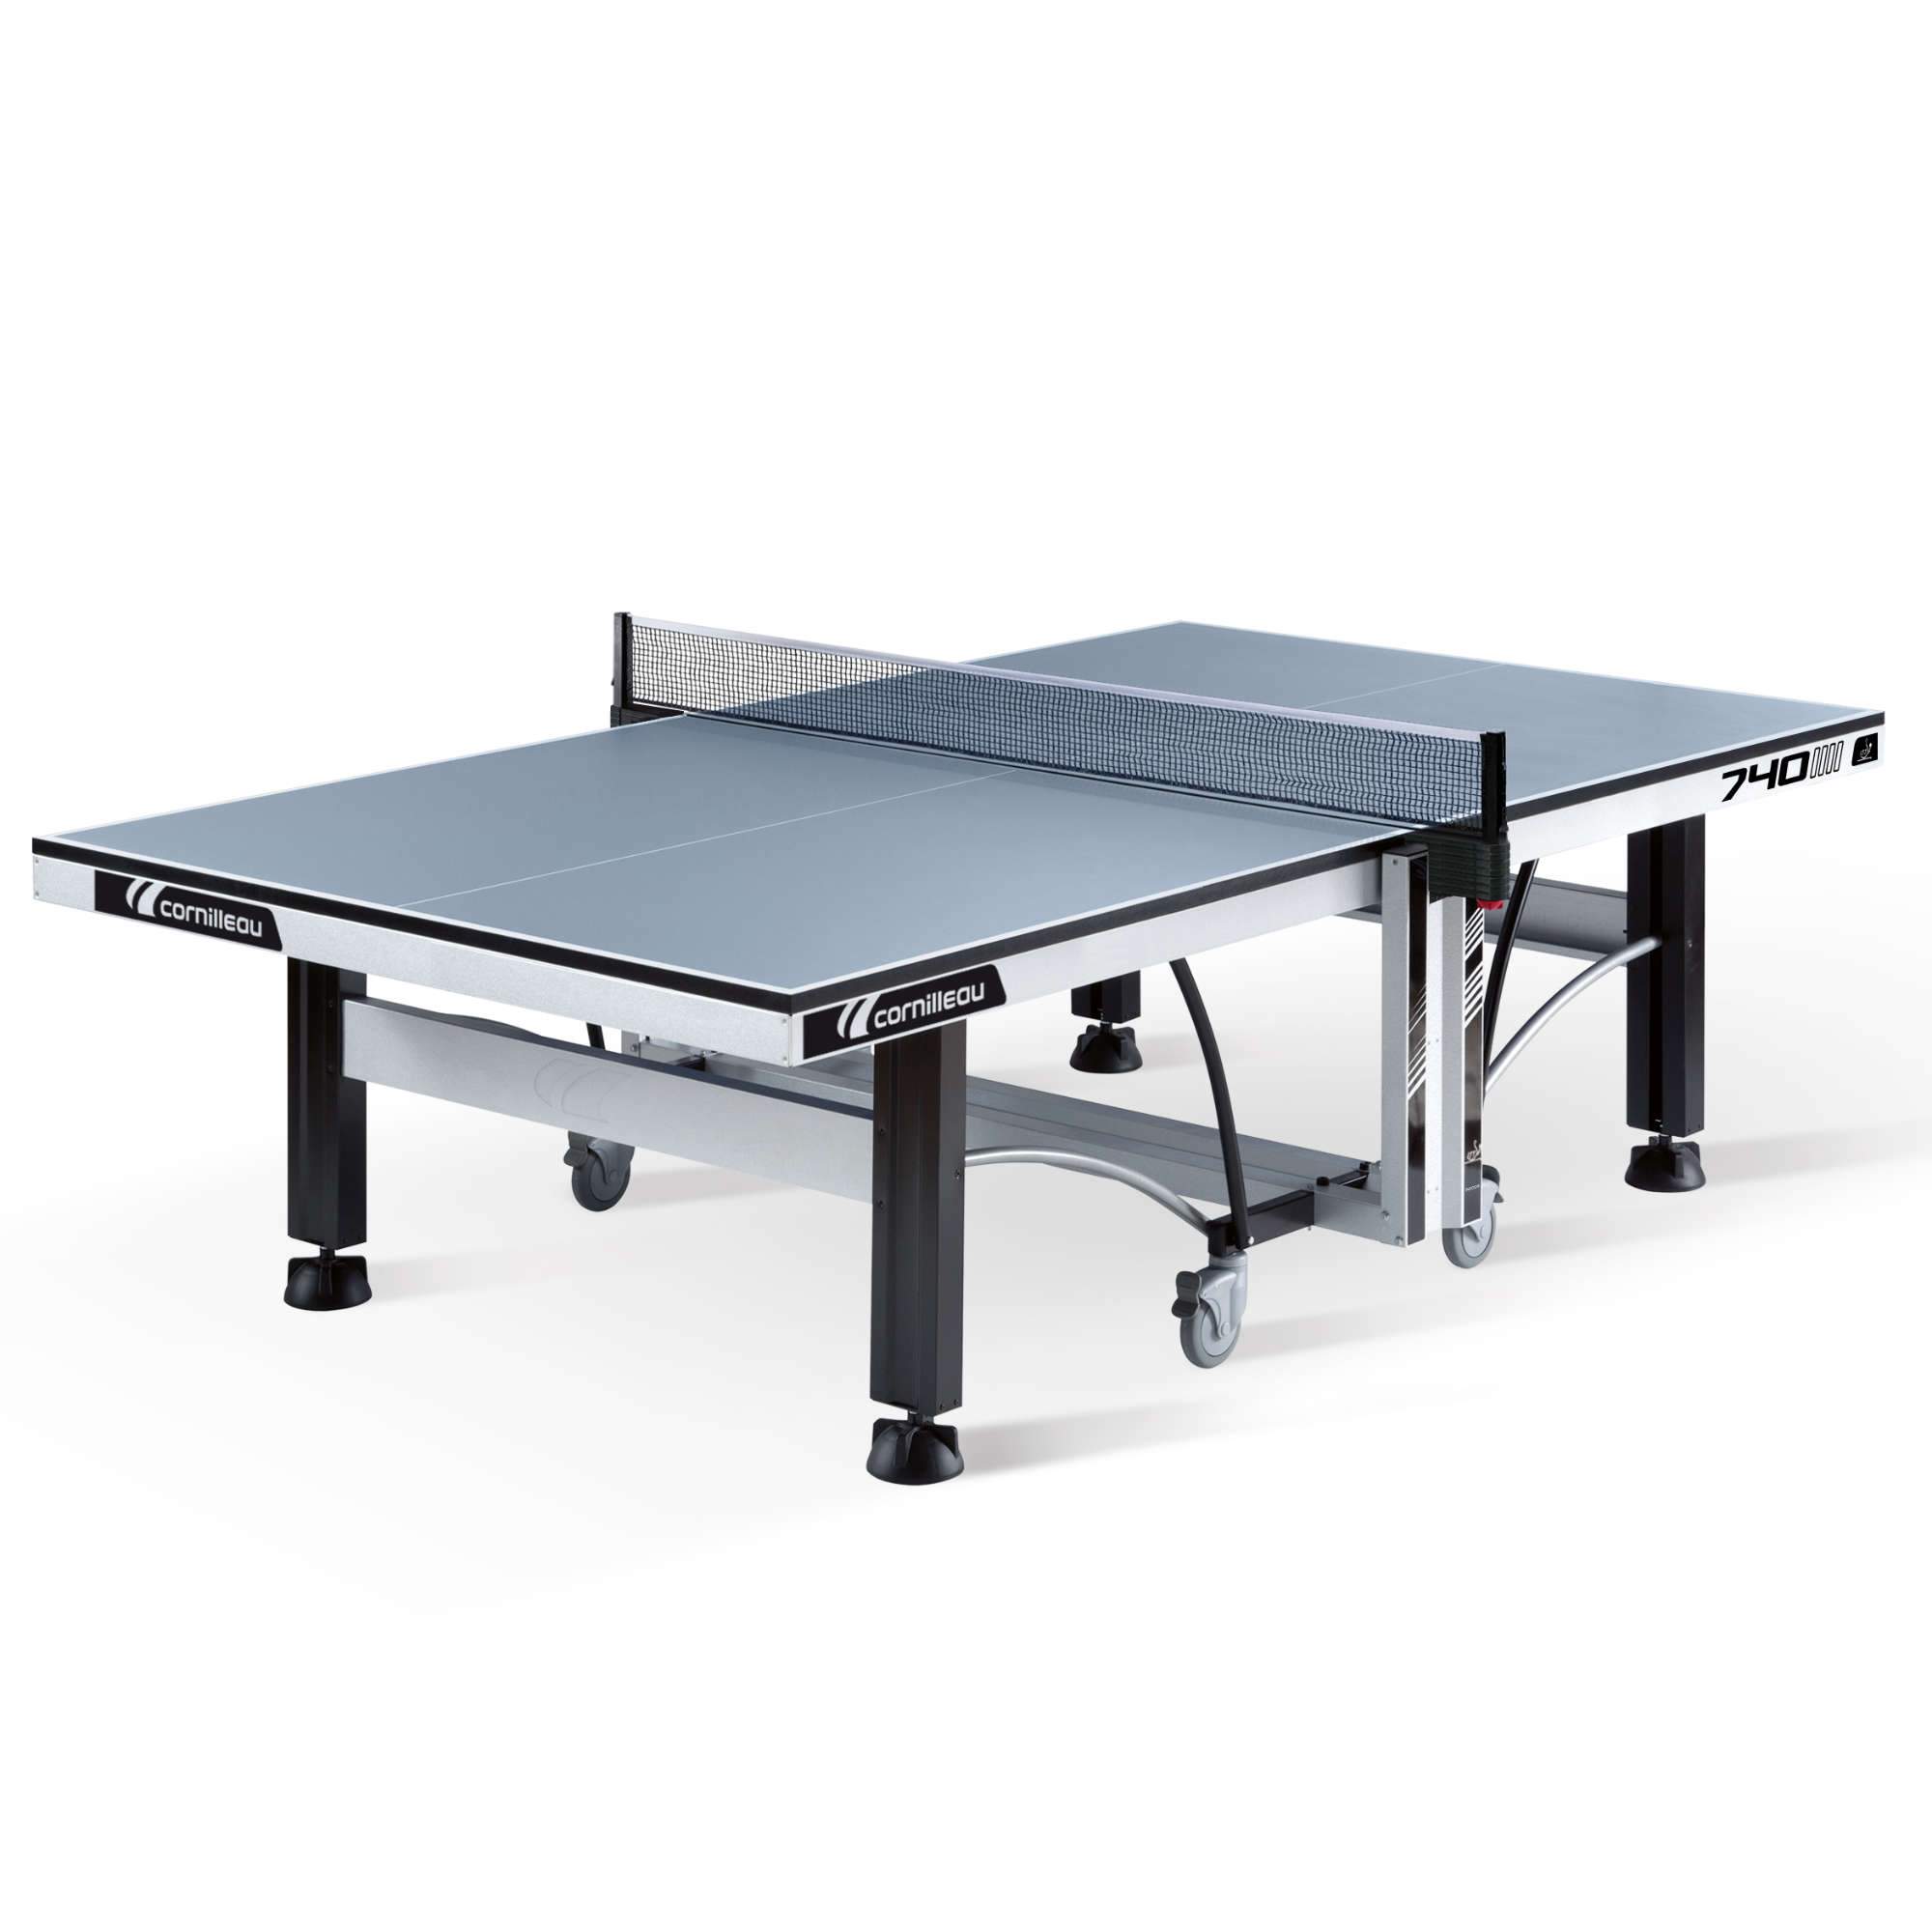 Cornilleau ITTF Competition 740 Rollaway Table Tennis Table